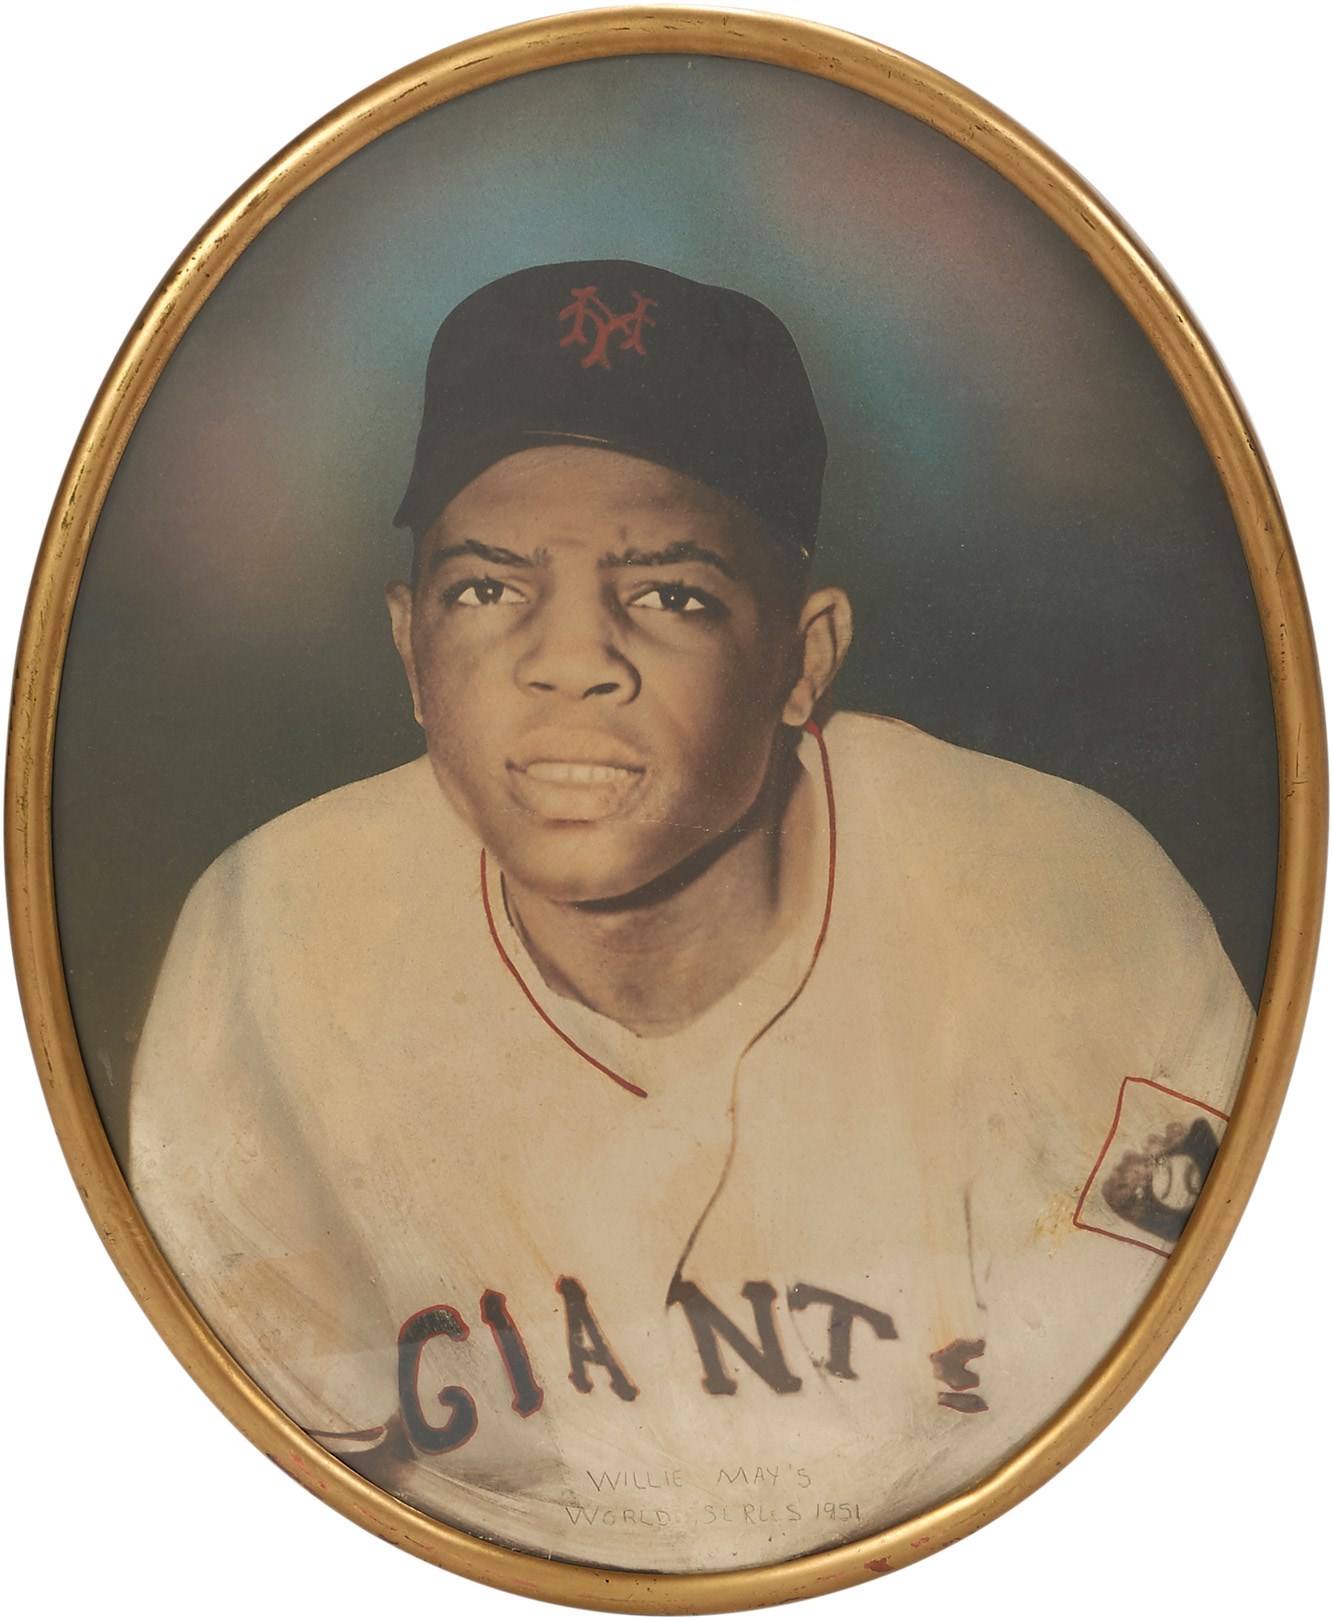 Baseball Memorabilia - 1951 Willie Mays Hand-colored Oval Photograph from His Family Home